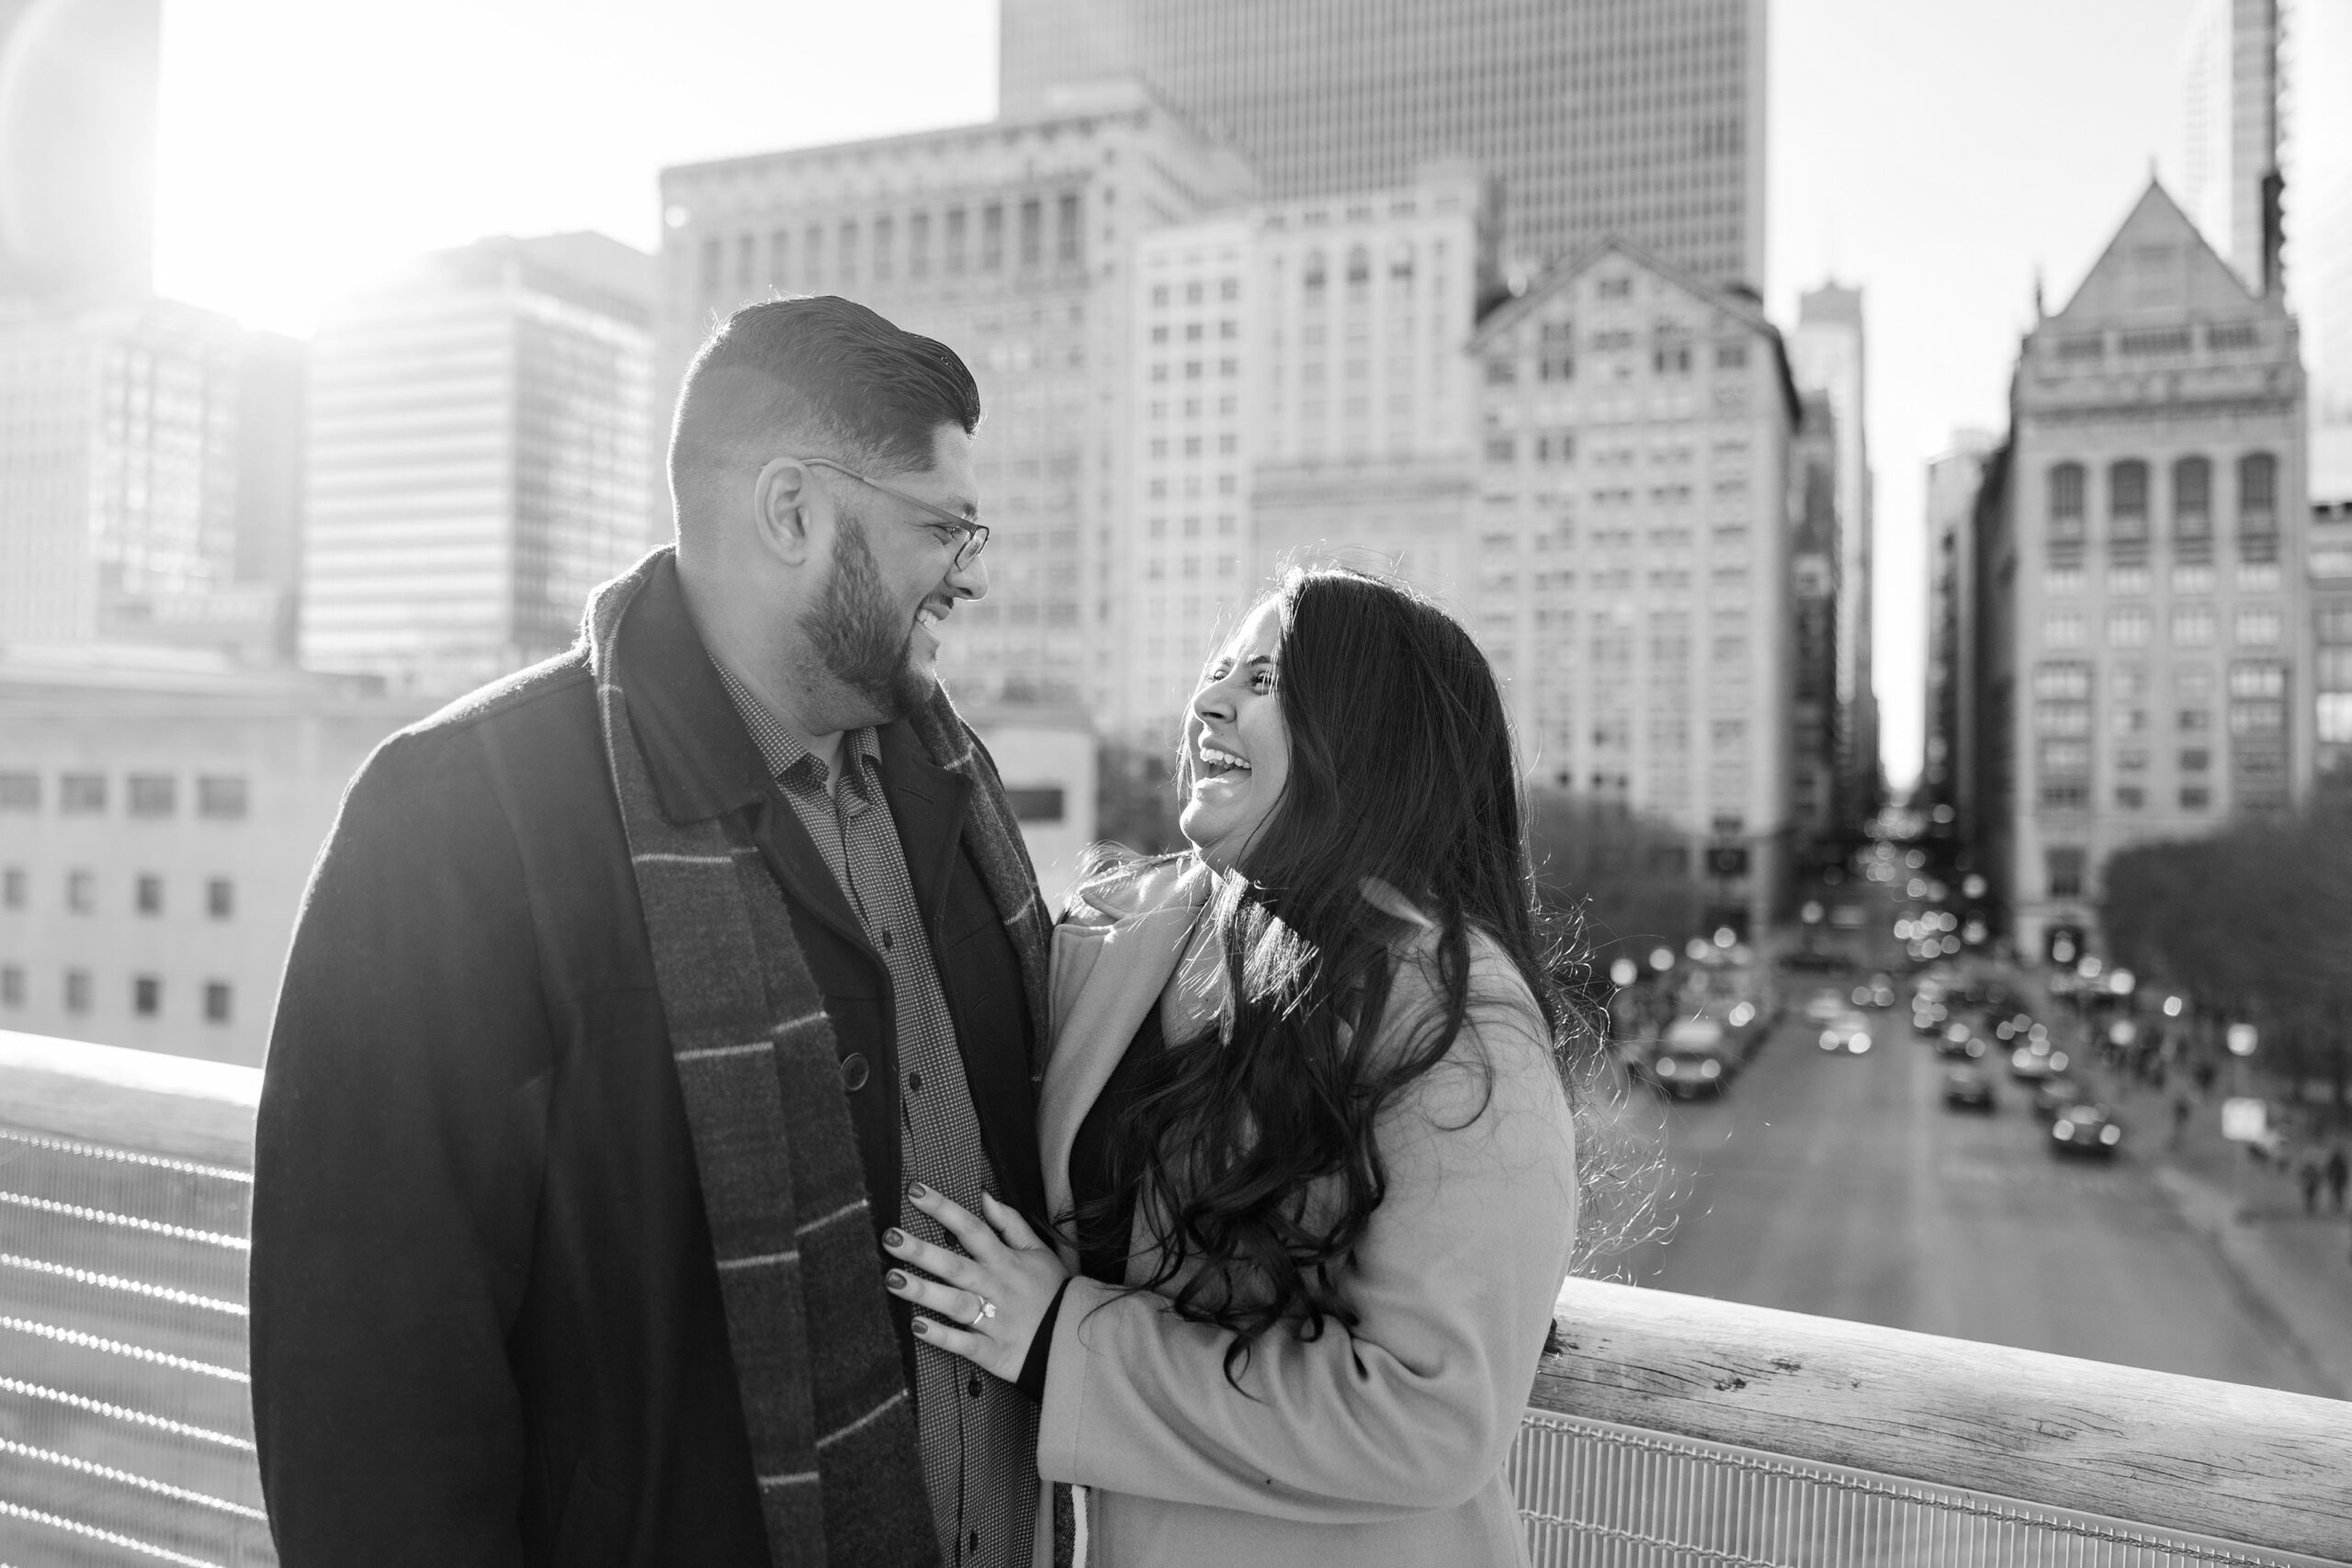 Man and woman smile at each other in Chicago